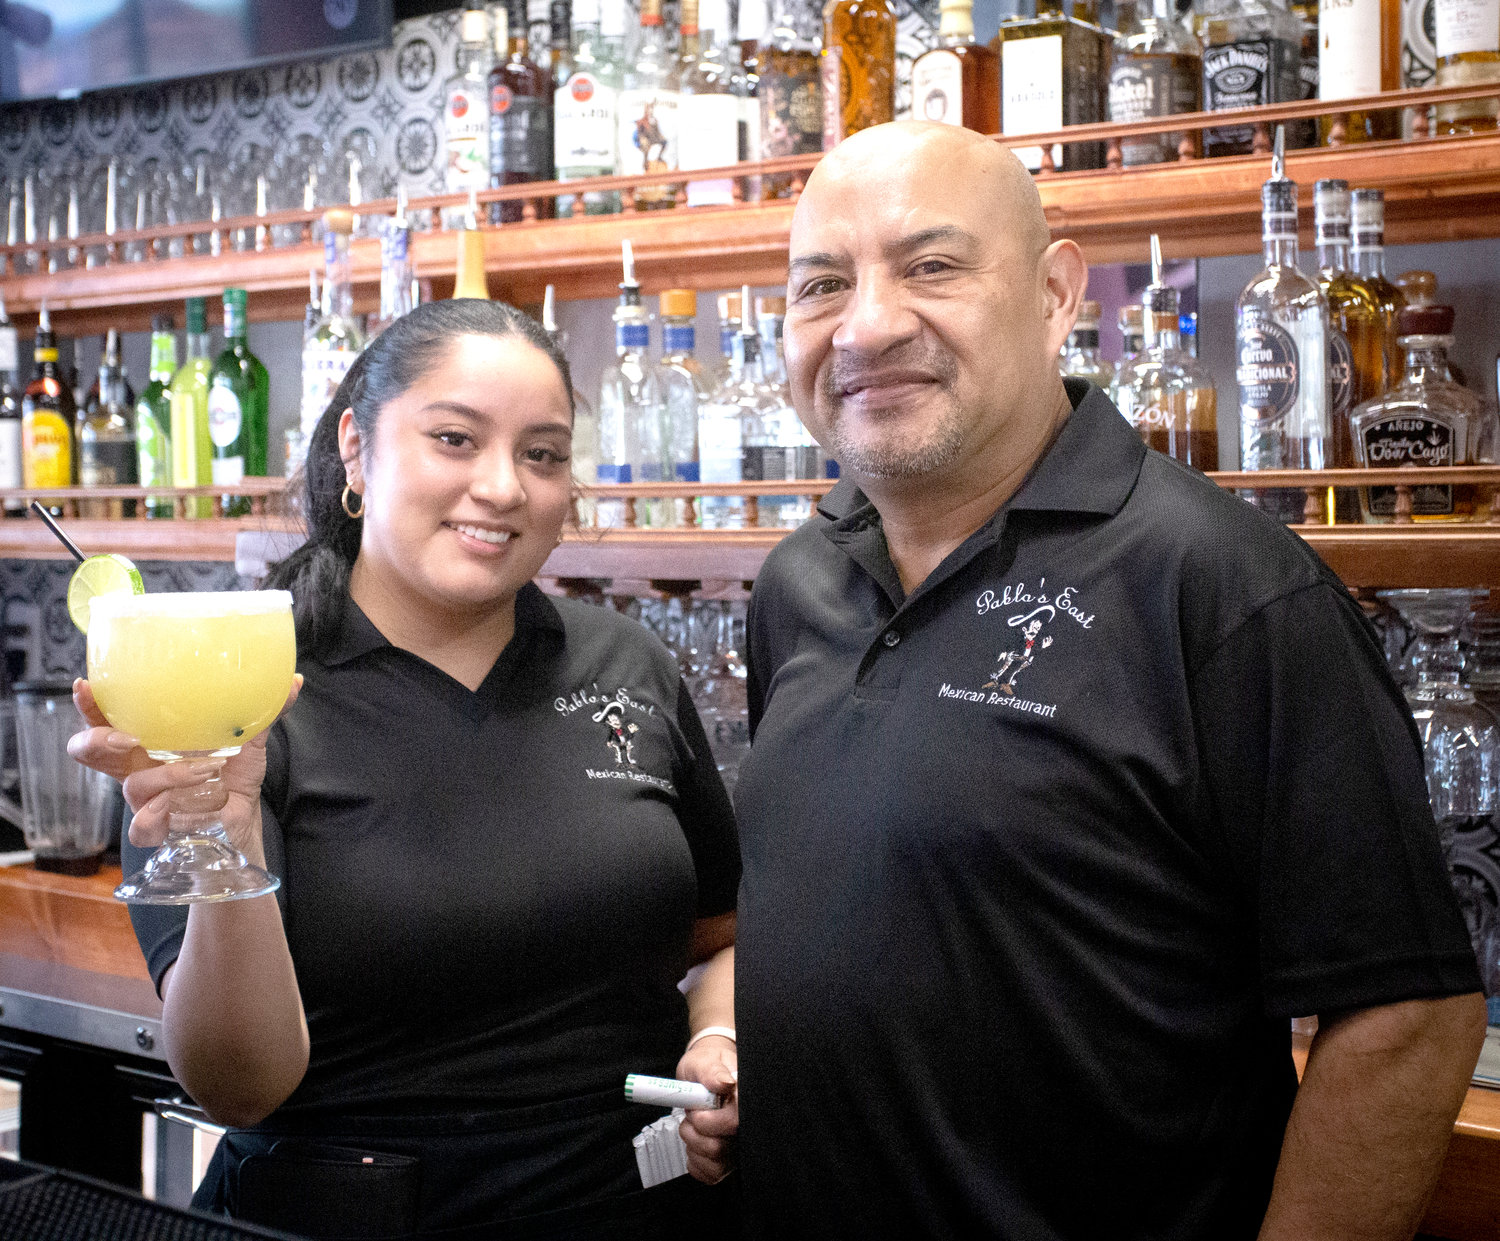 Maldonado with his daughter, Jacqueline, who has been working on her bartending skills. “At the first location, we don’t serve alcohol, so we really had to learn everything that goes into it,” she said.